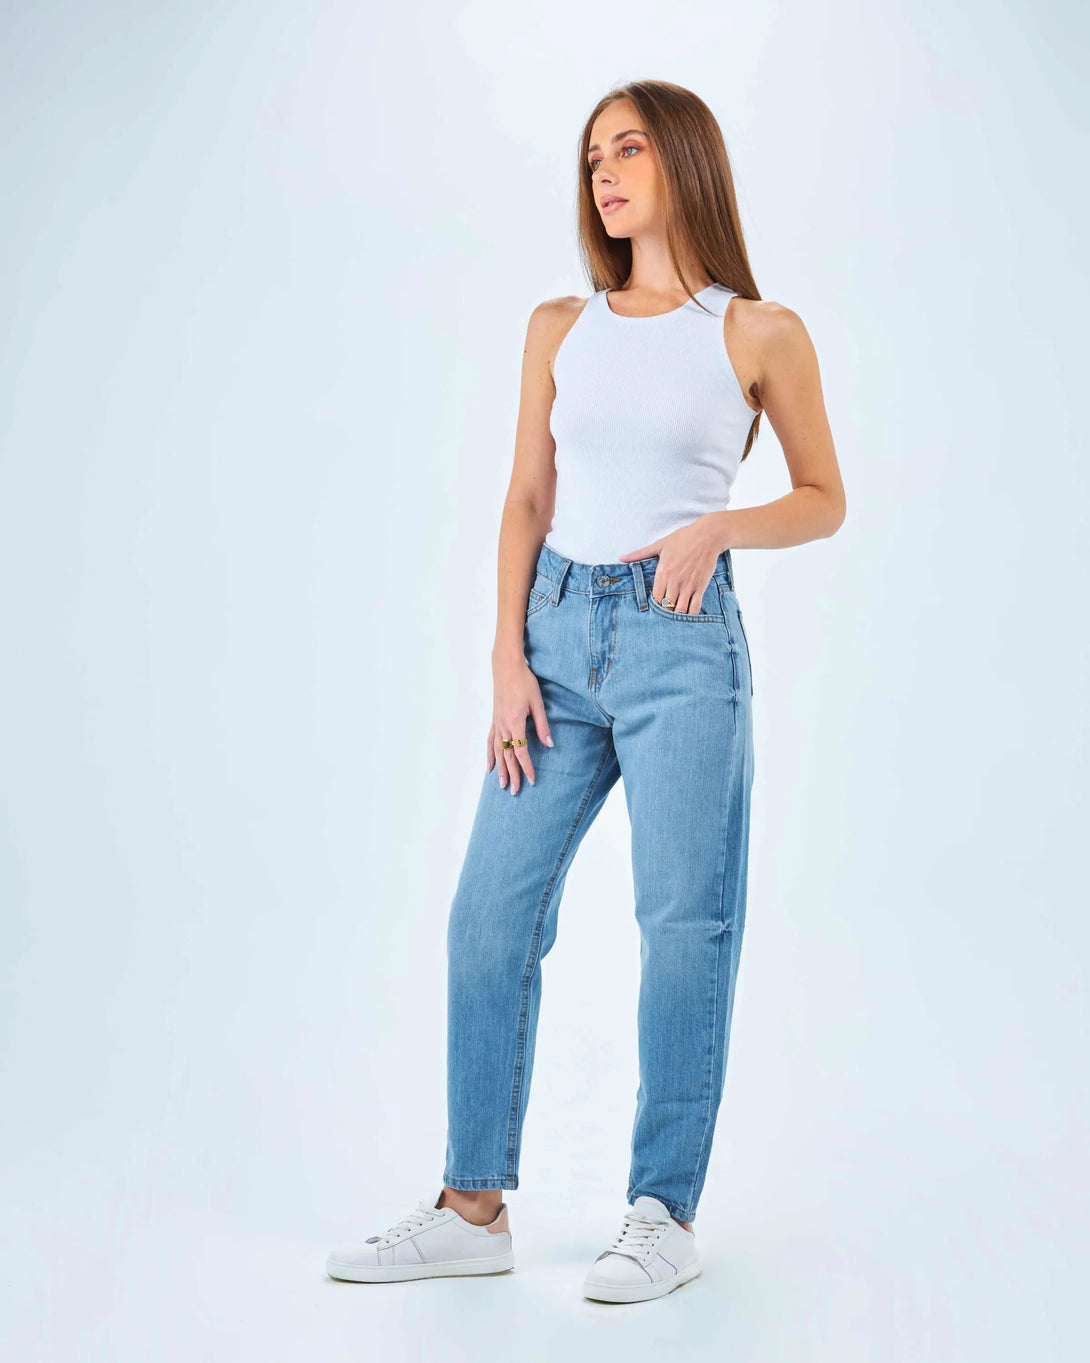 High-Waist Light Washed Mom-Fit Jeans.